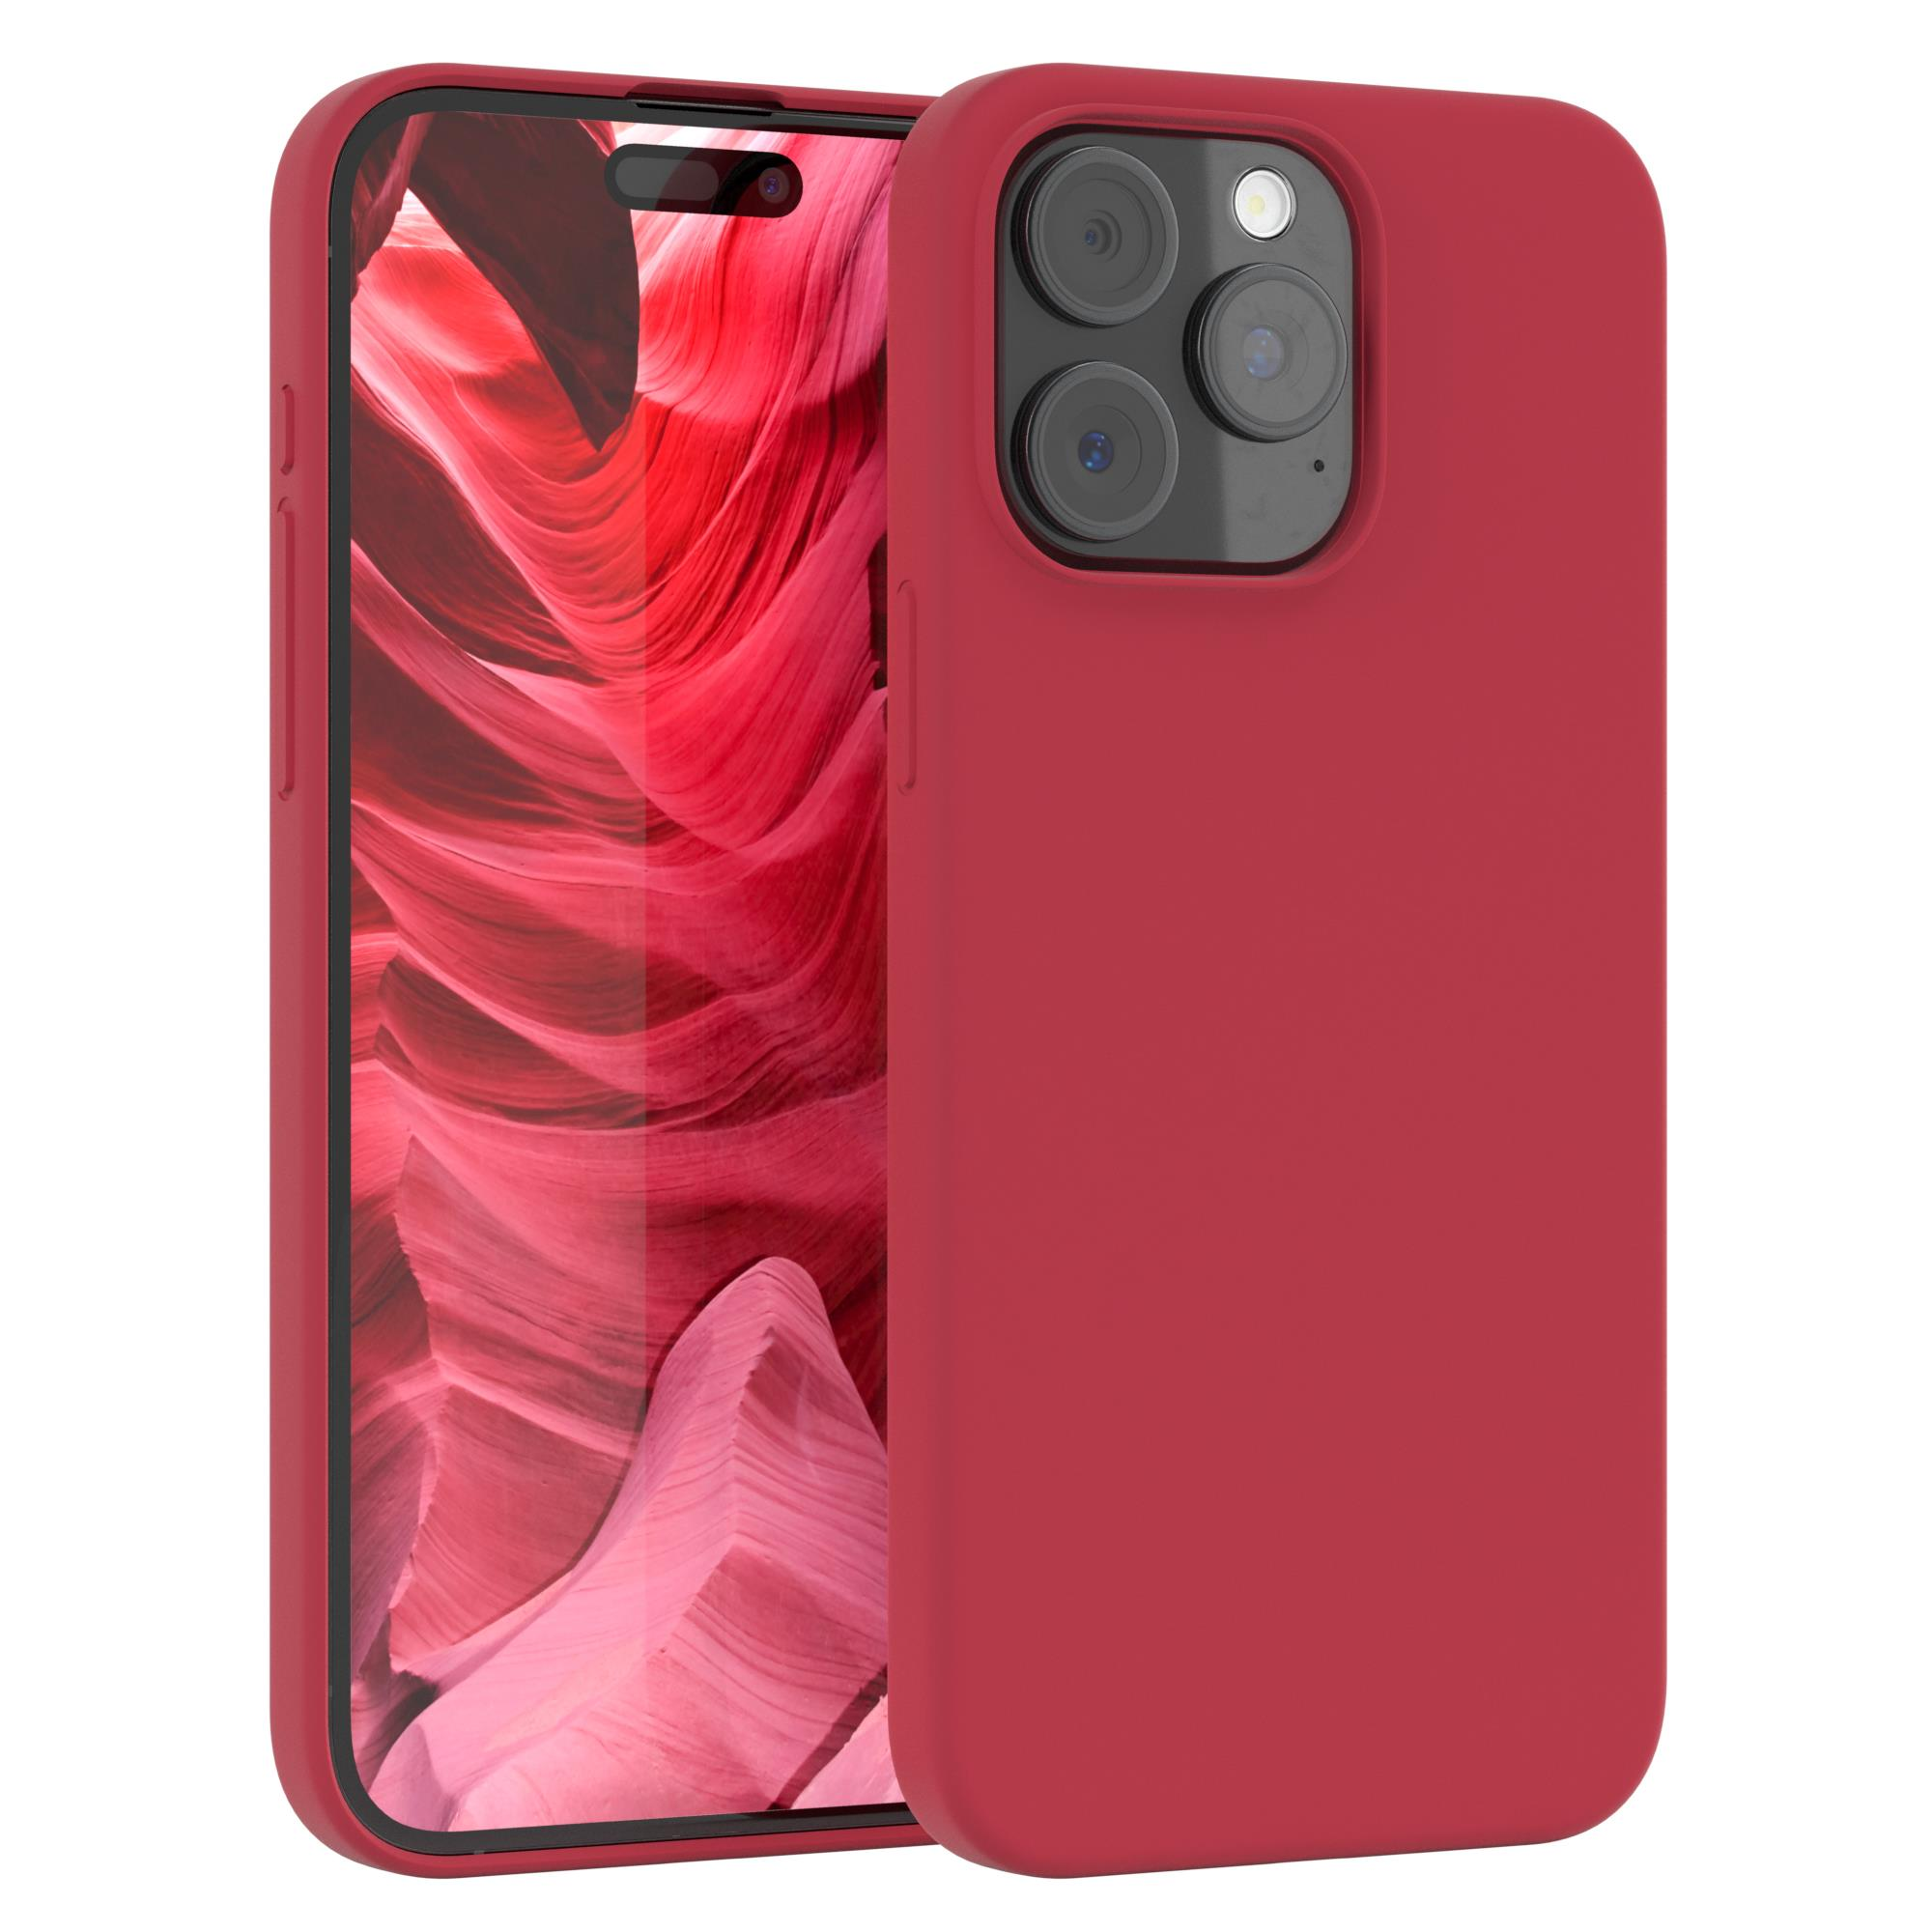 EAZY CASE Premium Silikon Handycase, iPhone Backcover, Max, Beere 15 / Rot Apple, Pro